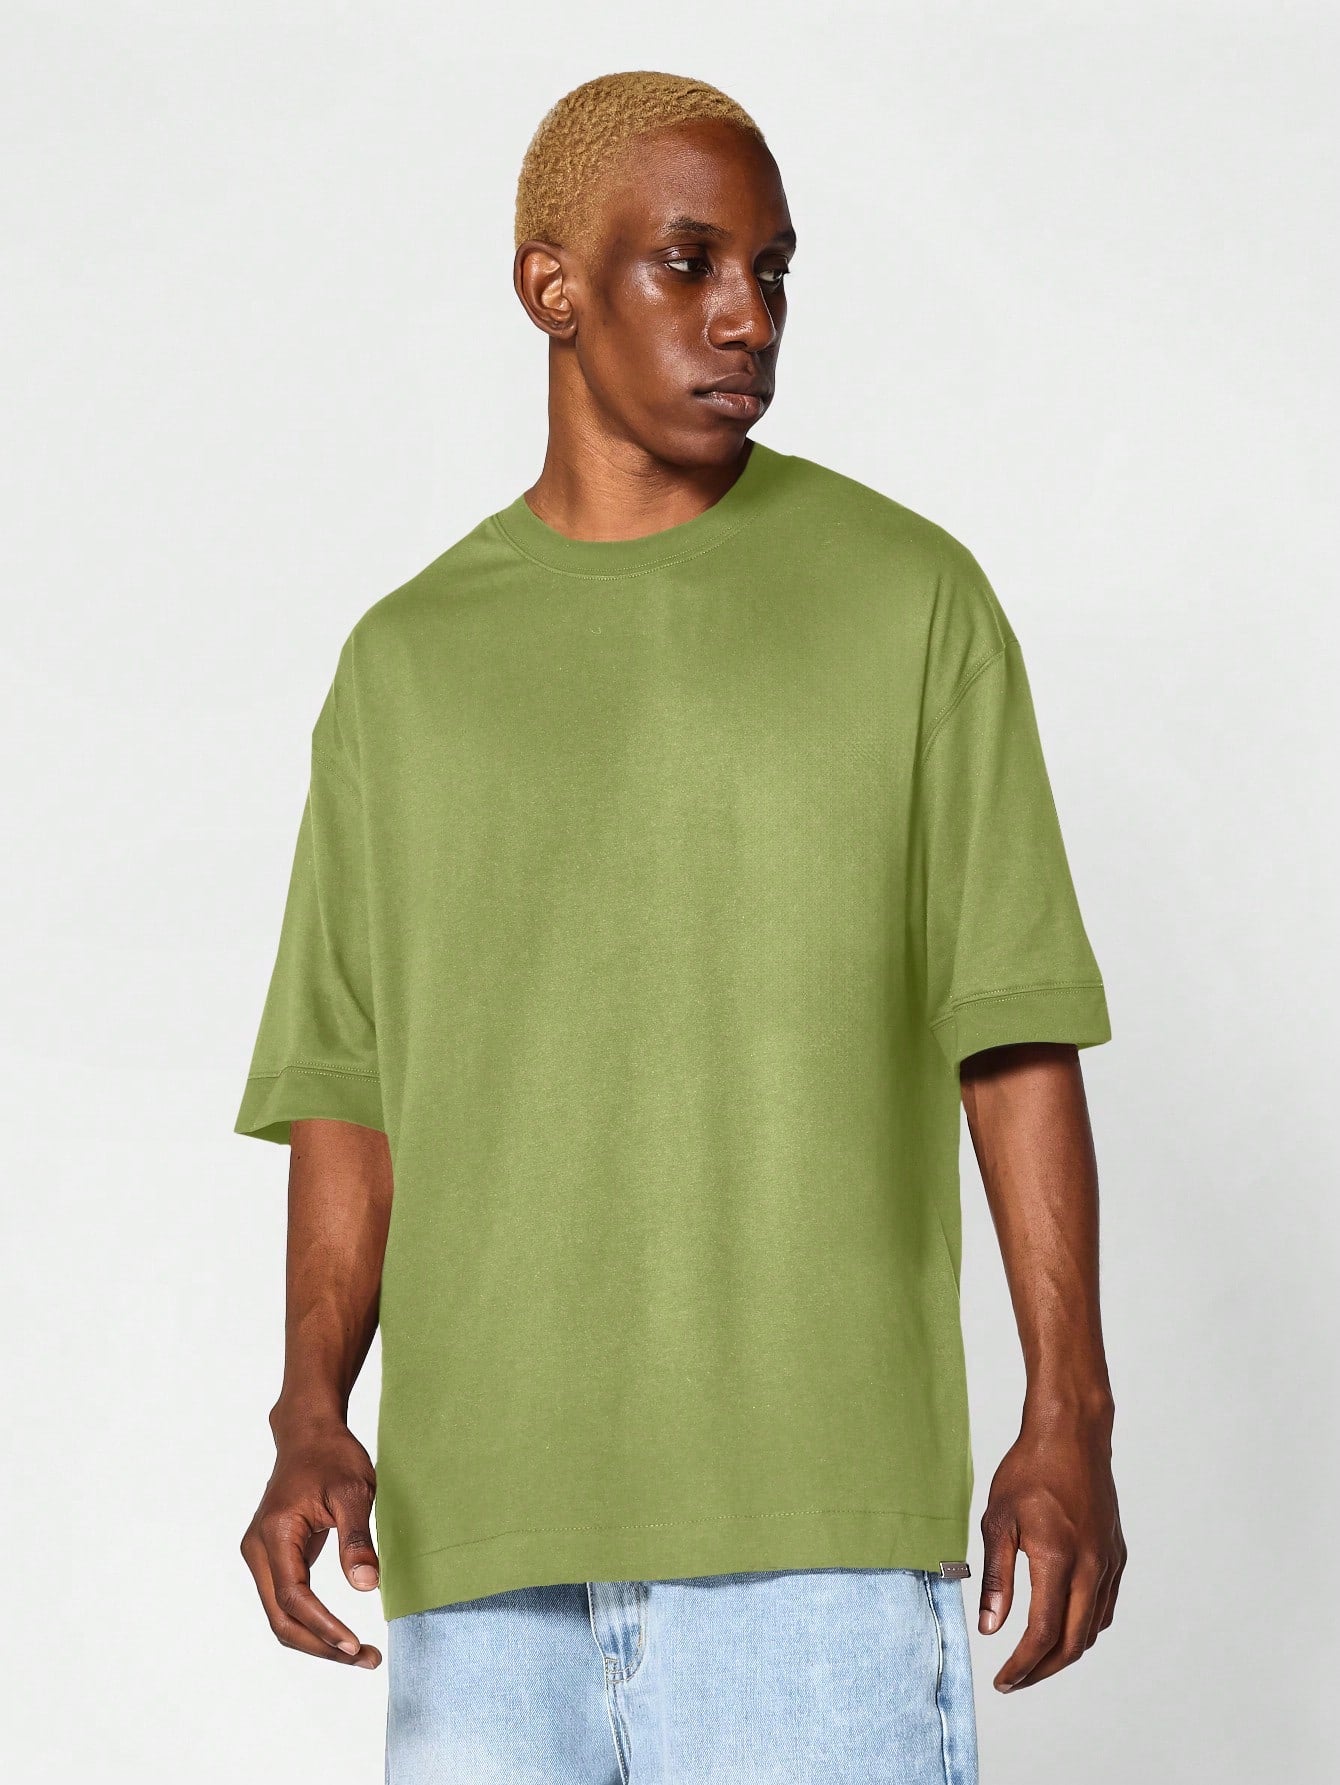 Oversized Fit Essential Short Sleeve Tee College Ready